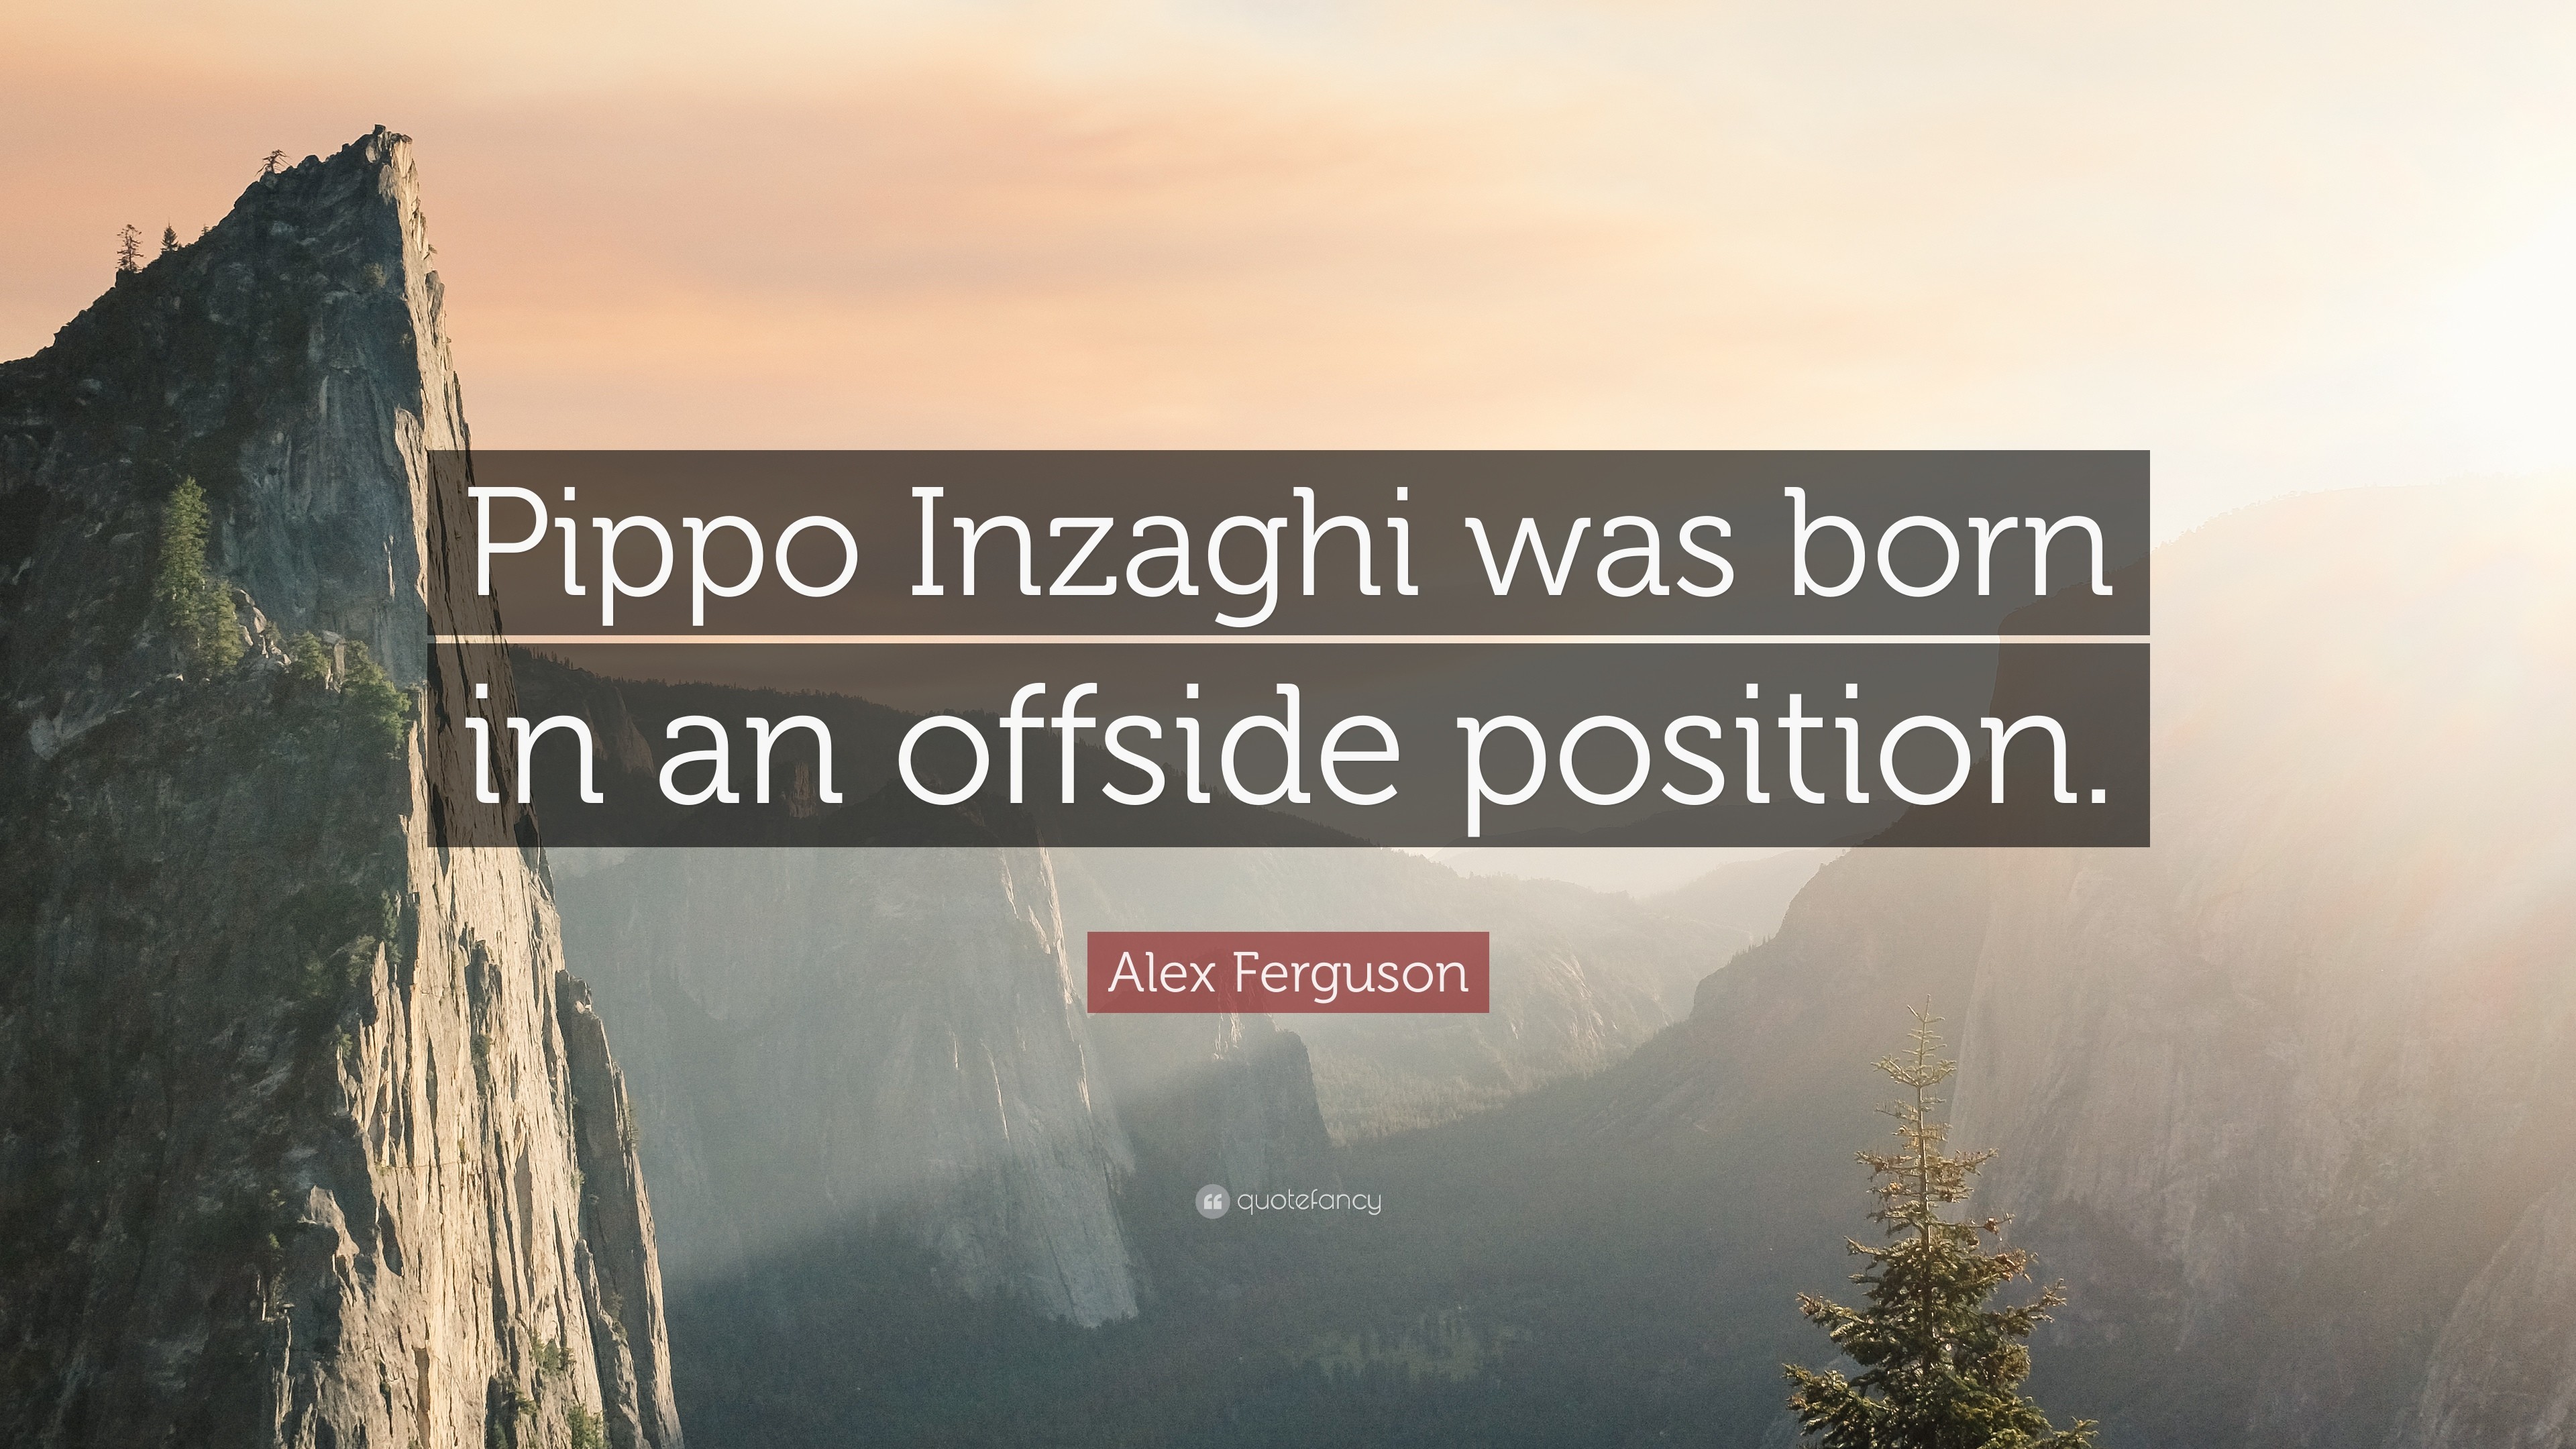 3840x2160 Alex Ferguson Quote: “Pippo Inzaghi was born in an offside position.”